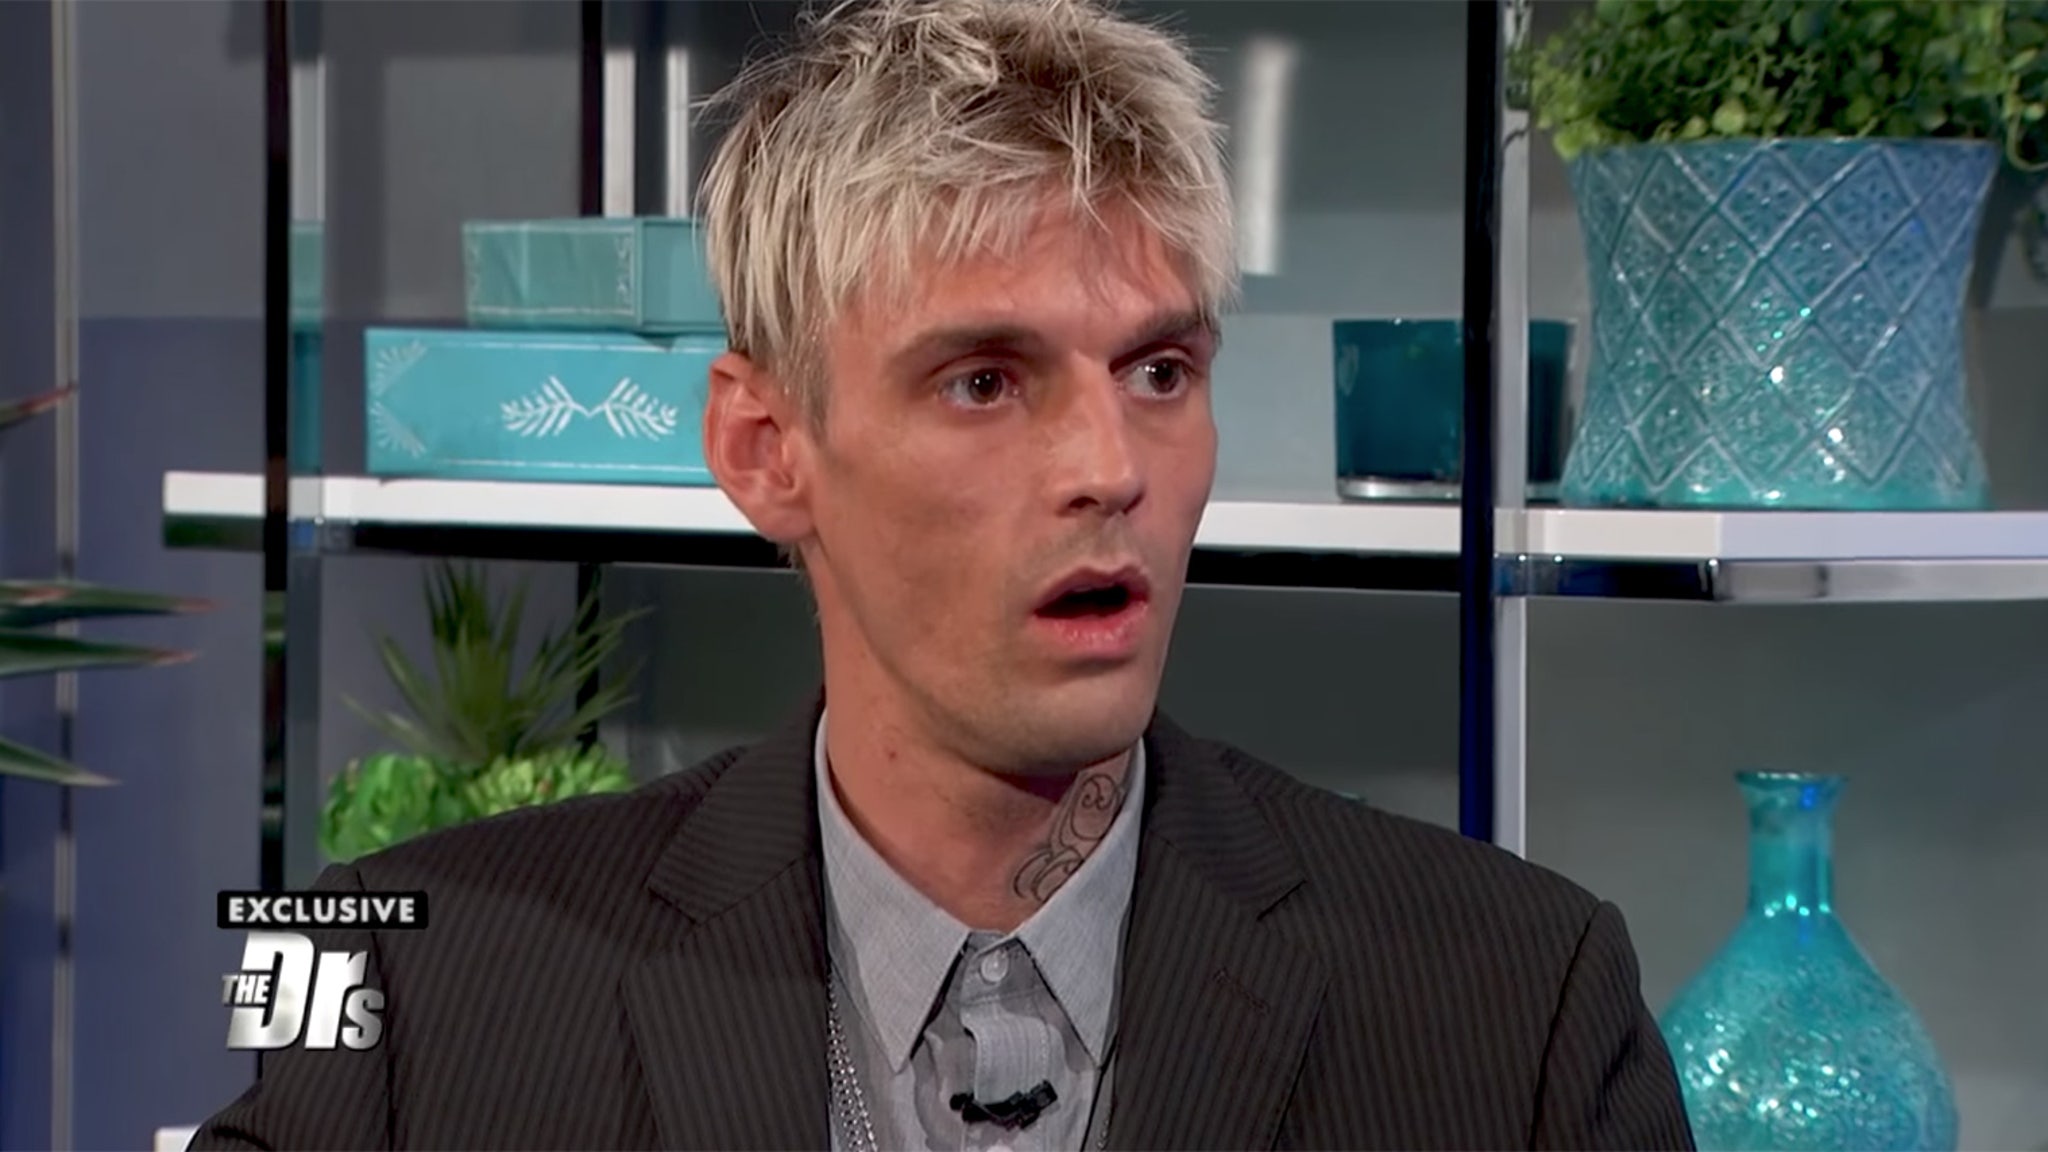 Aaron carter have hiv